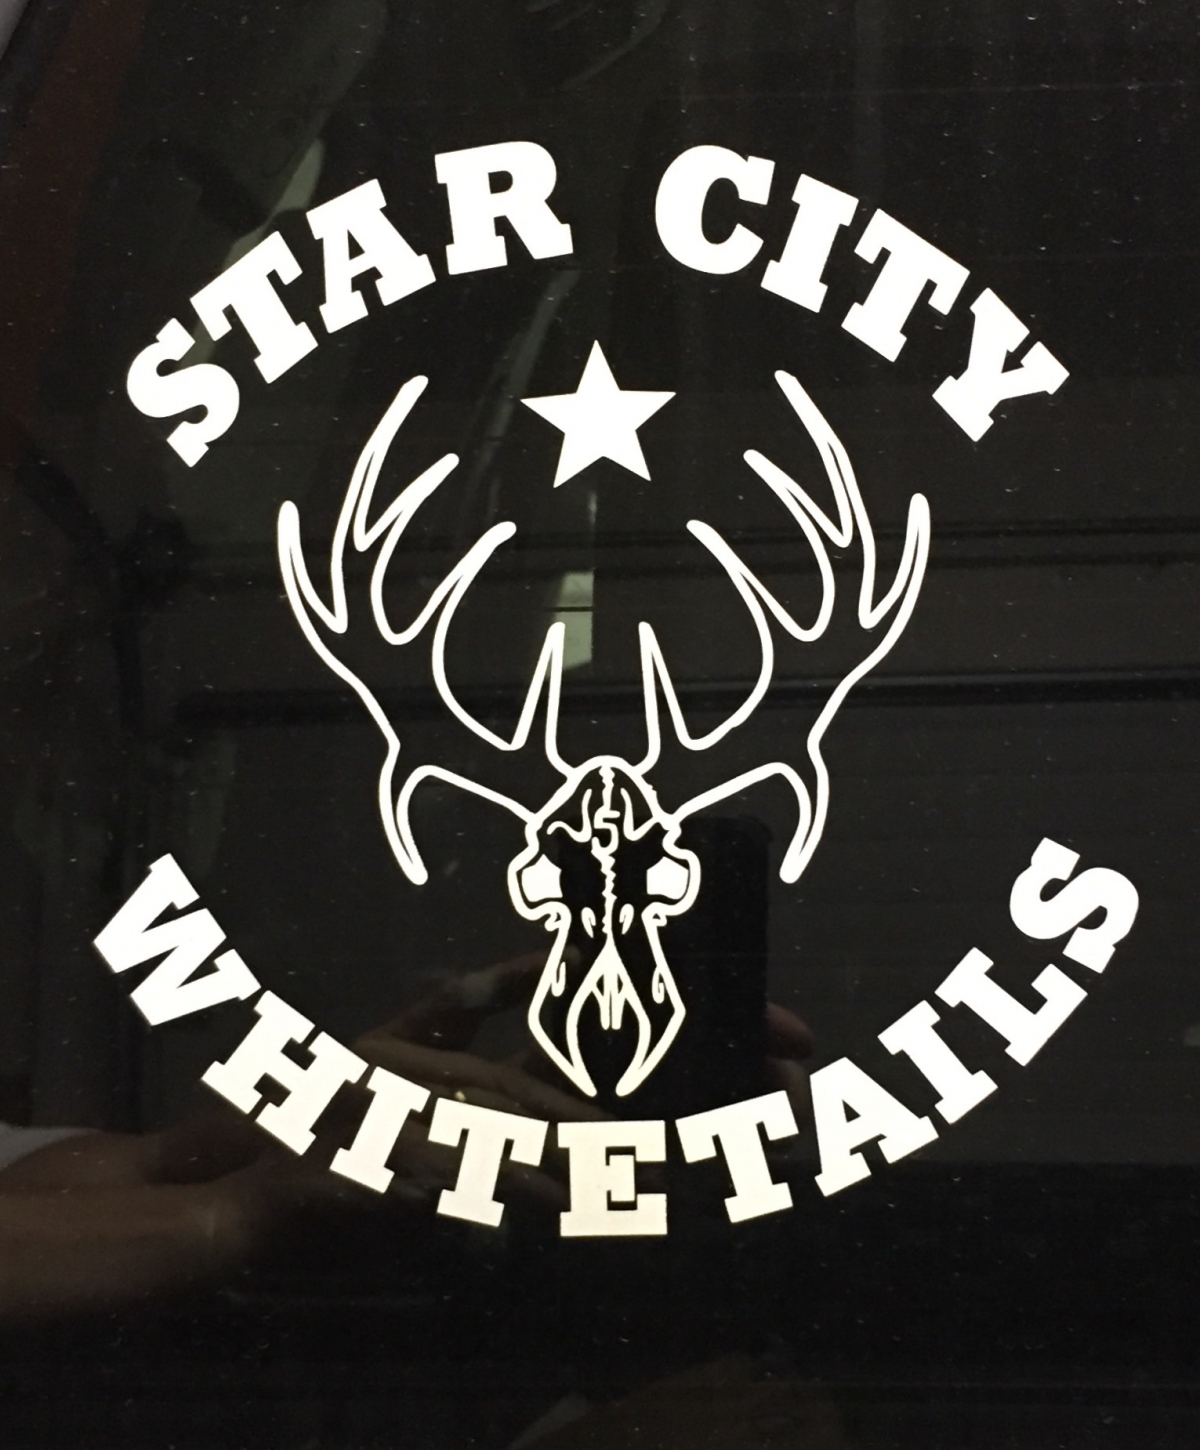 STAR CITY WHITETAILS THEME SONG-performed by Ike Logan & Jeff Phillips-2010